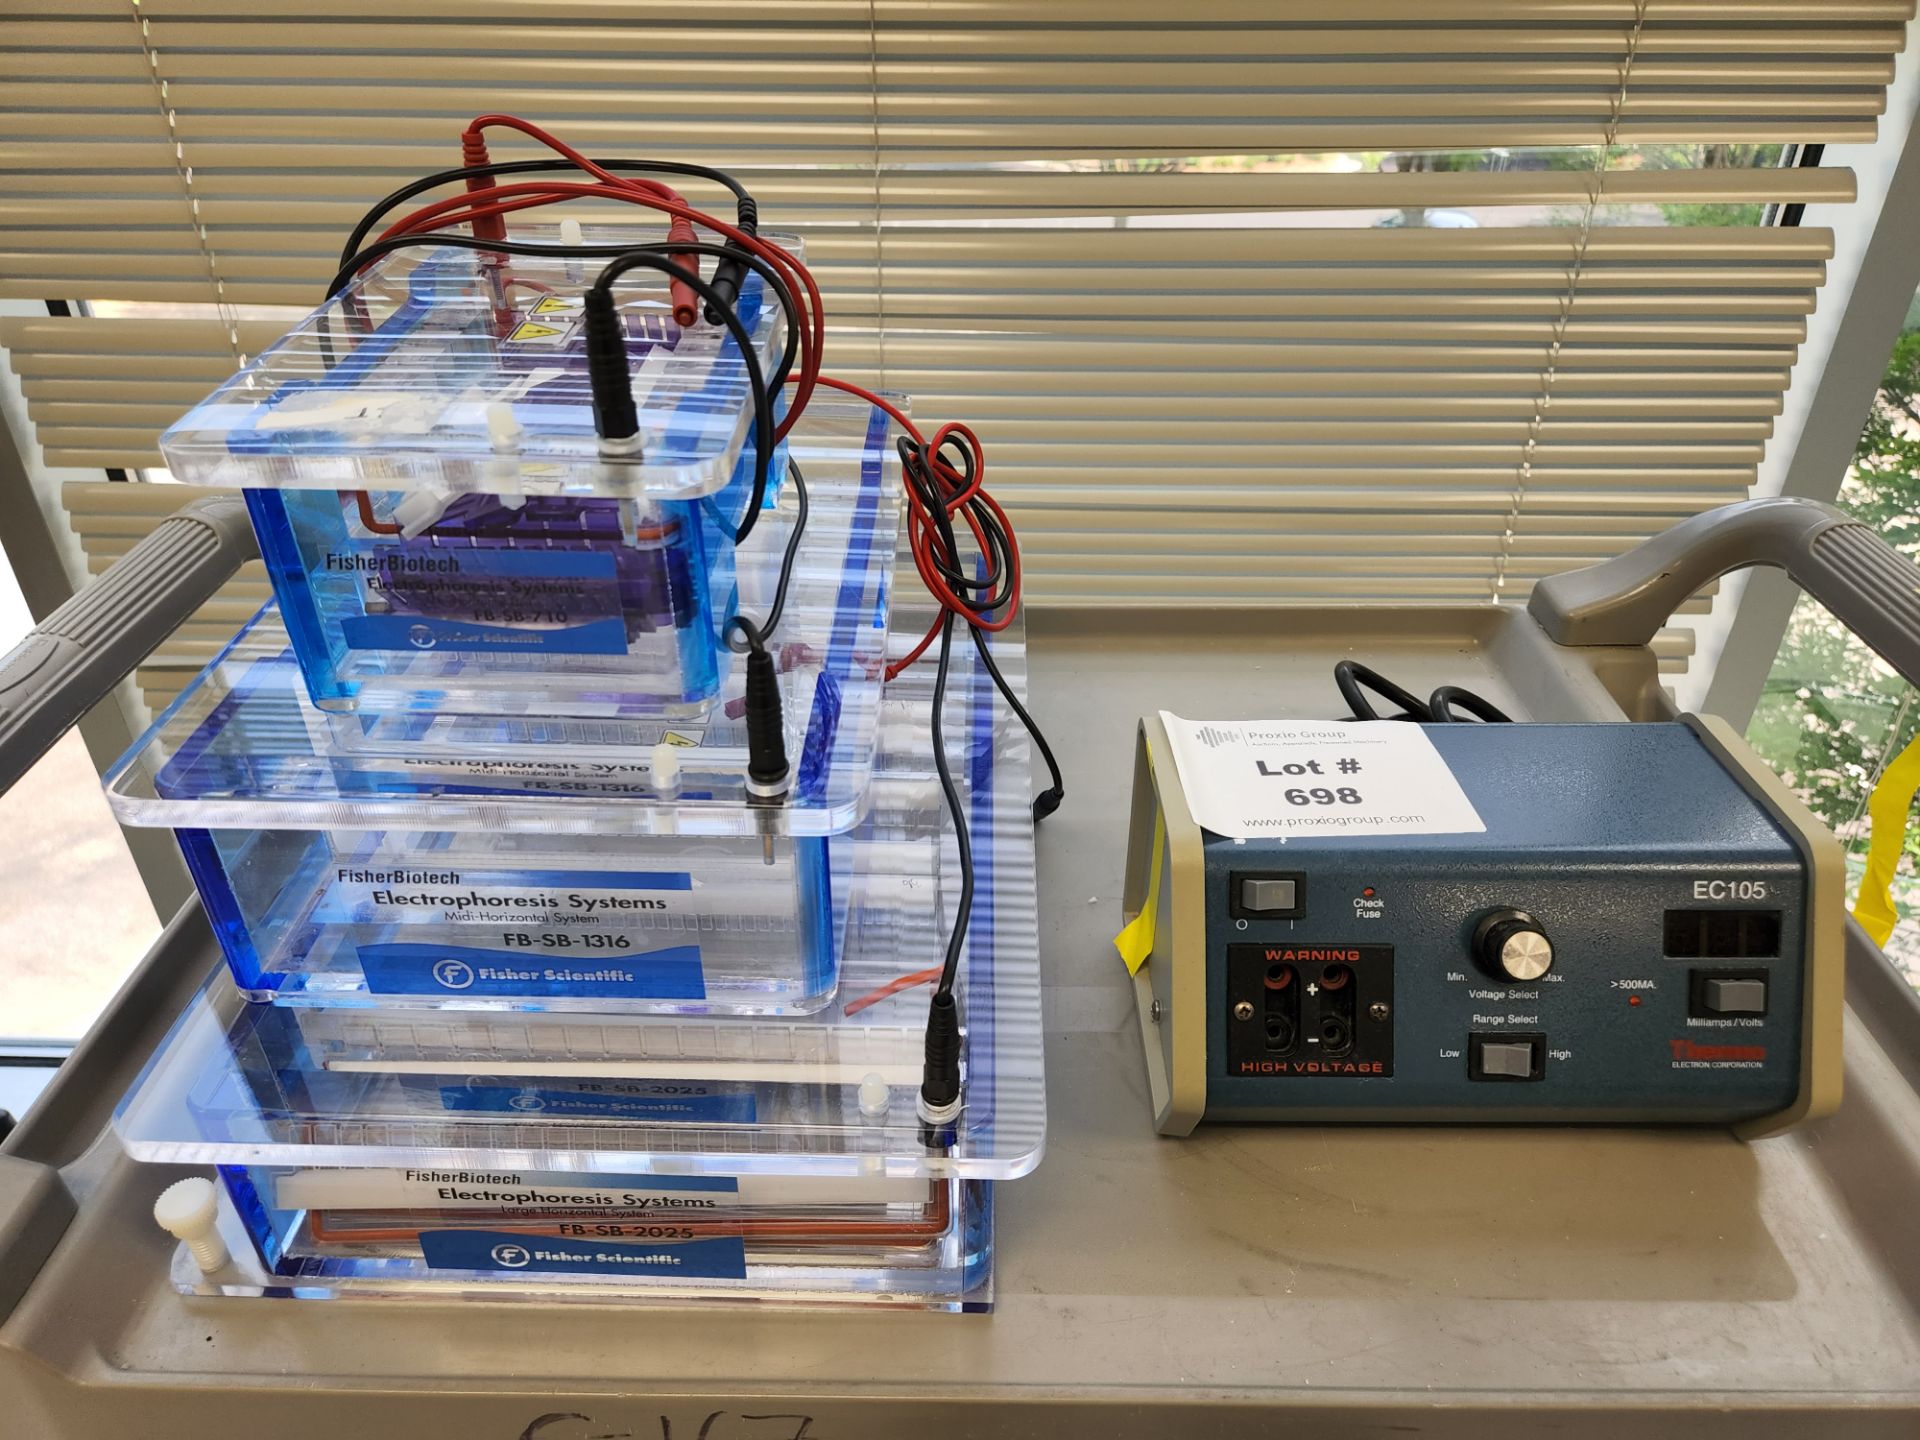 Thermo Electron Corporation Model Ec105 Electrophoresis With (1) Fisherbrand Model Fb-Sb-2025